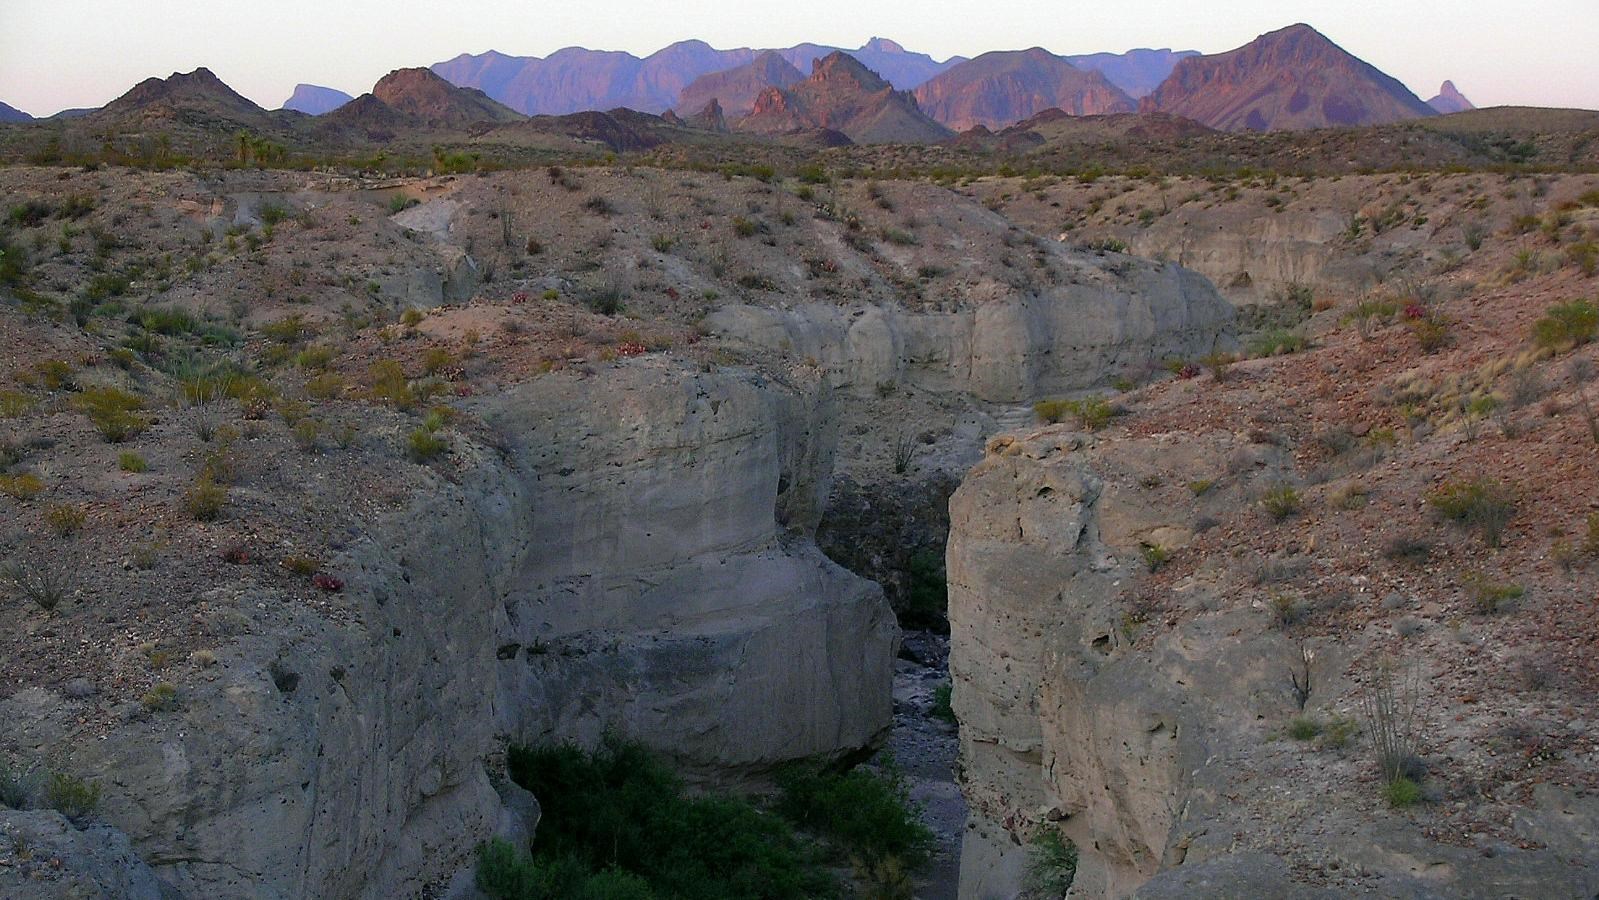 The setting sun casts a glow over a canyon composed of gray tuff, with mountains rising behind.